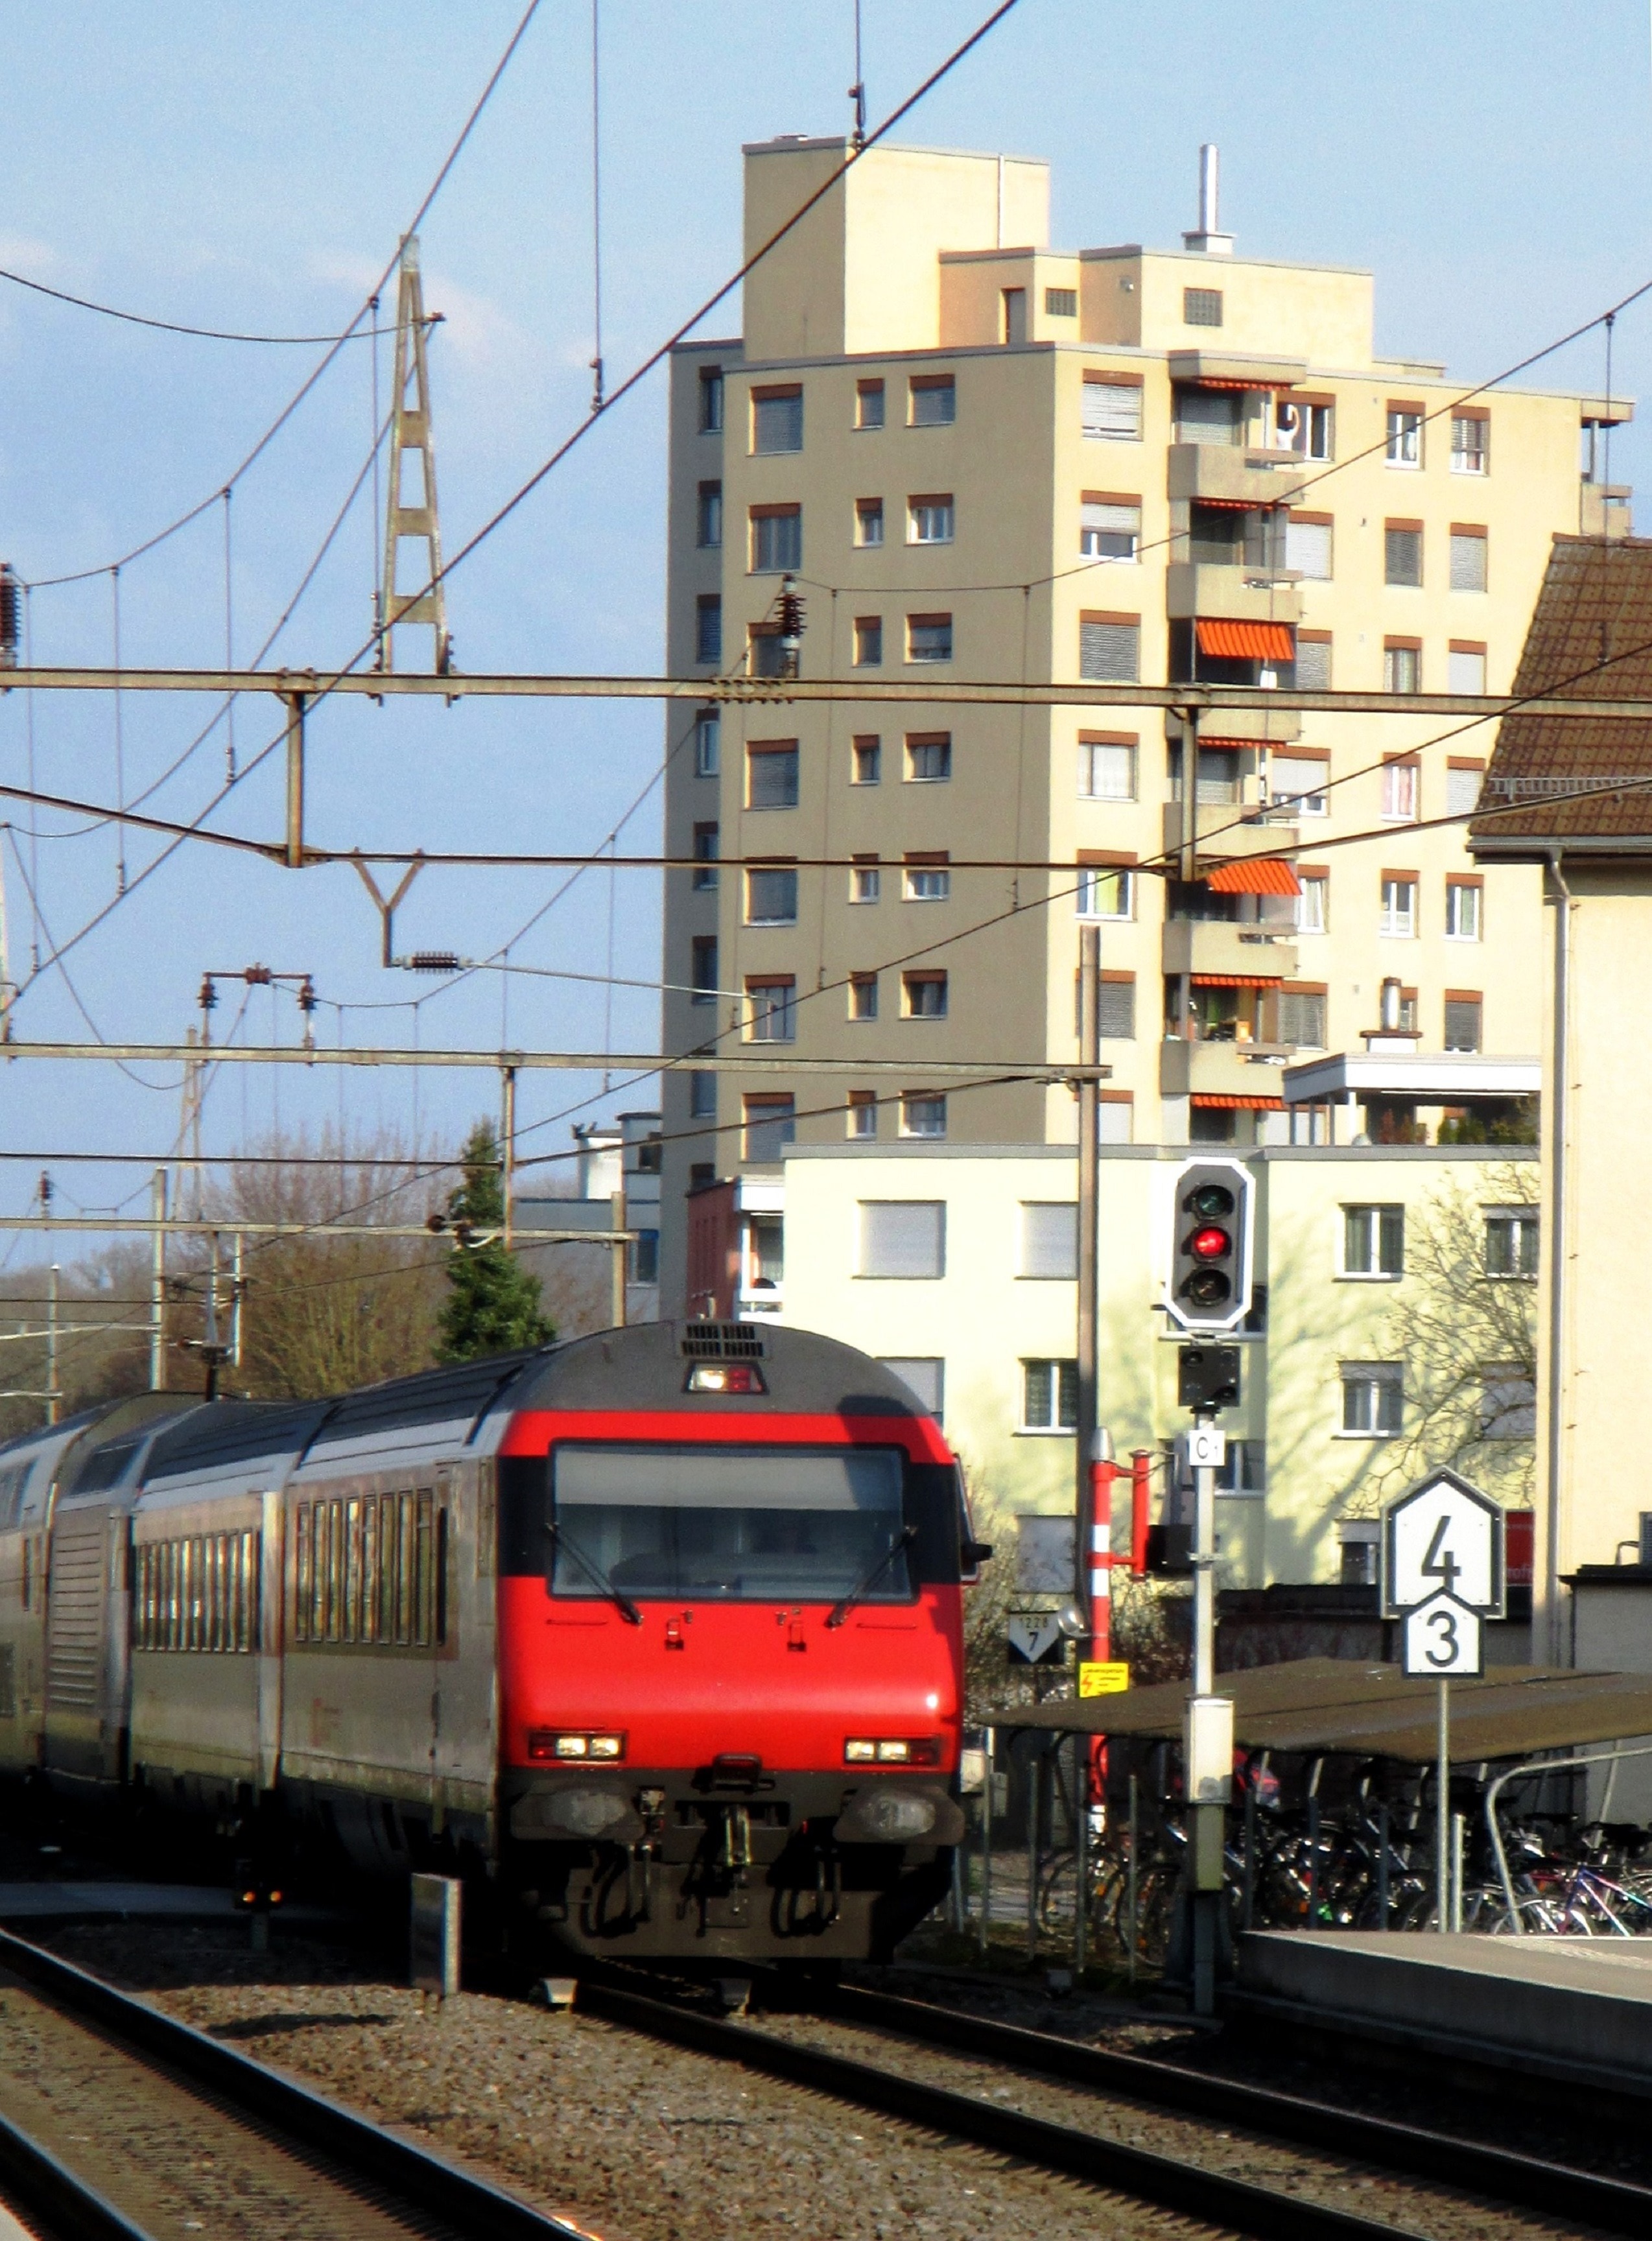 red and gray train passing white and black traffic light near station during daytime